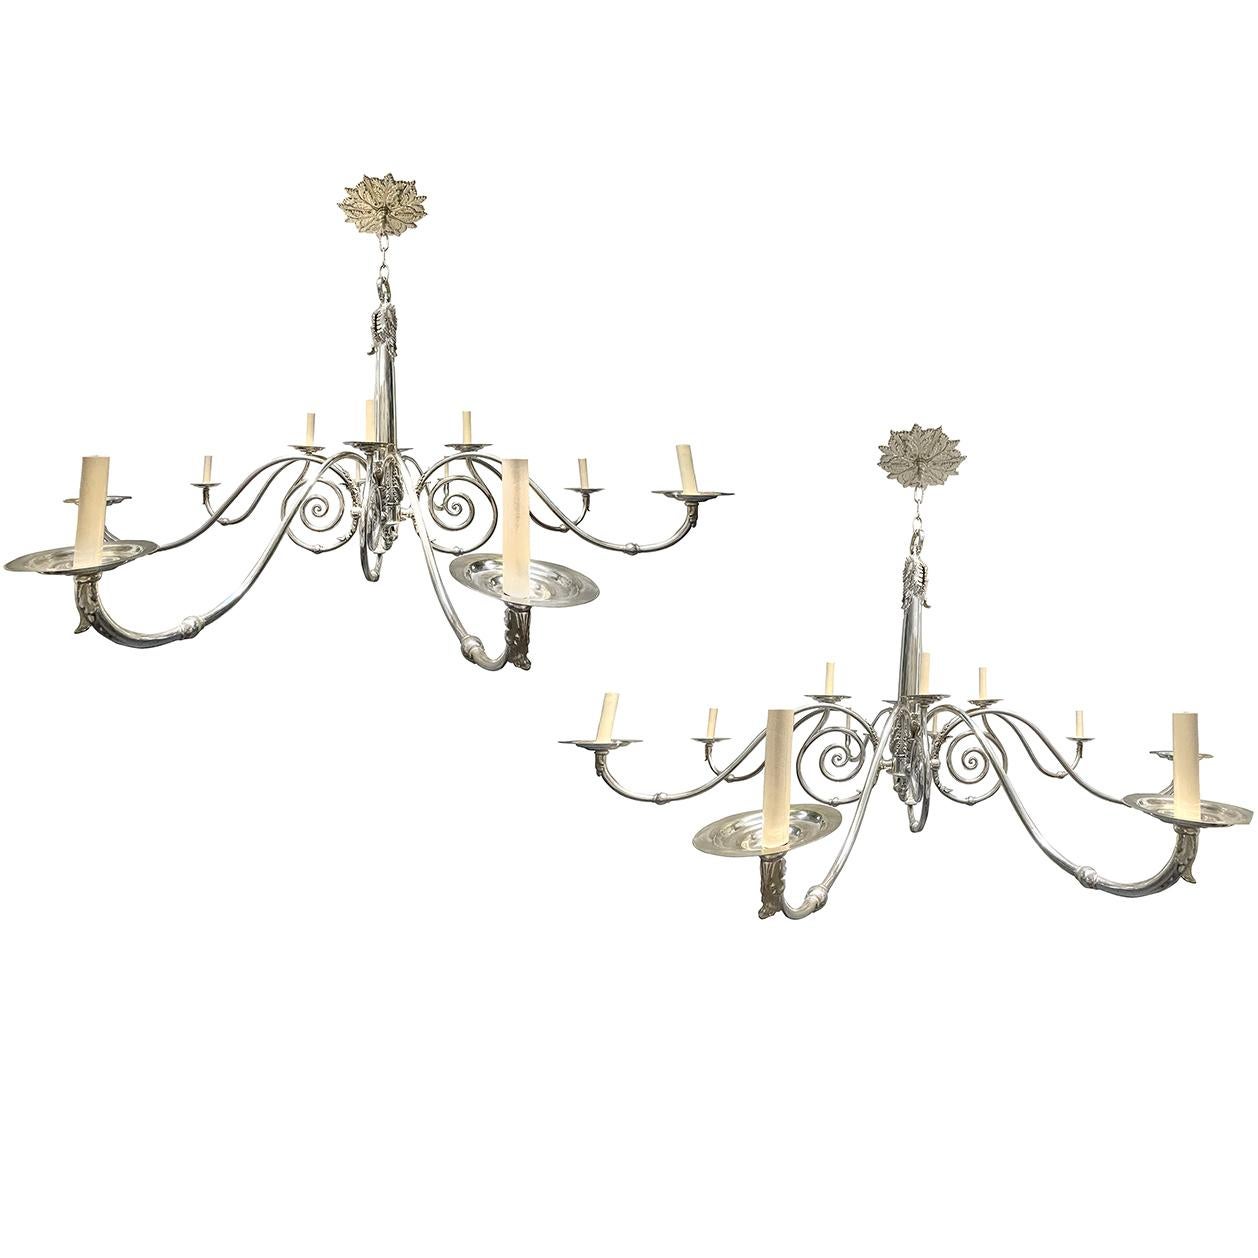 A pair of circa 19th century English silver-plated bronze twelve-light chandeliers with scrolling arm motif. Sold individually.

Measurements:
Diameter: 63